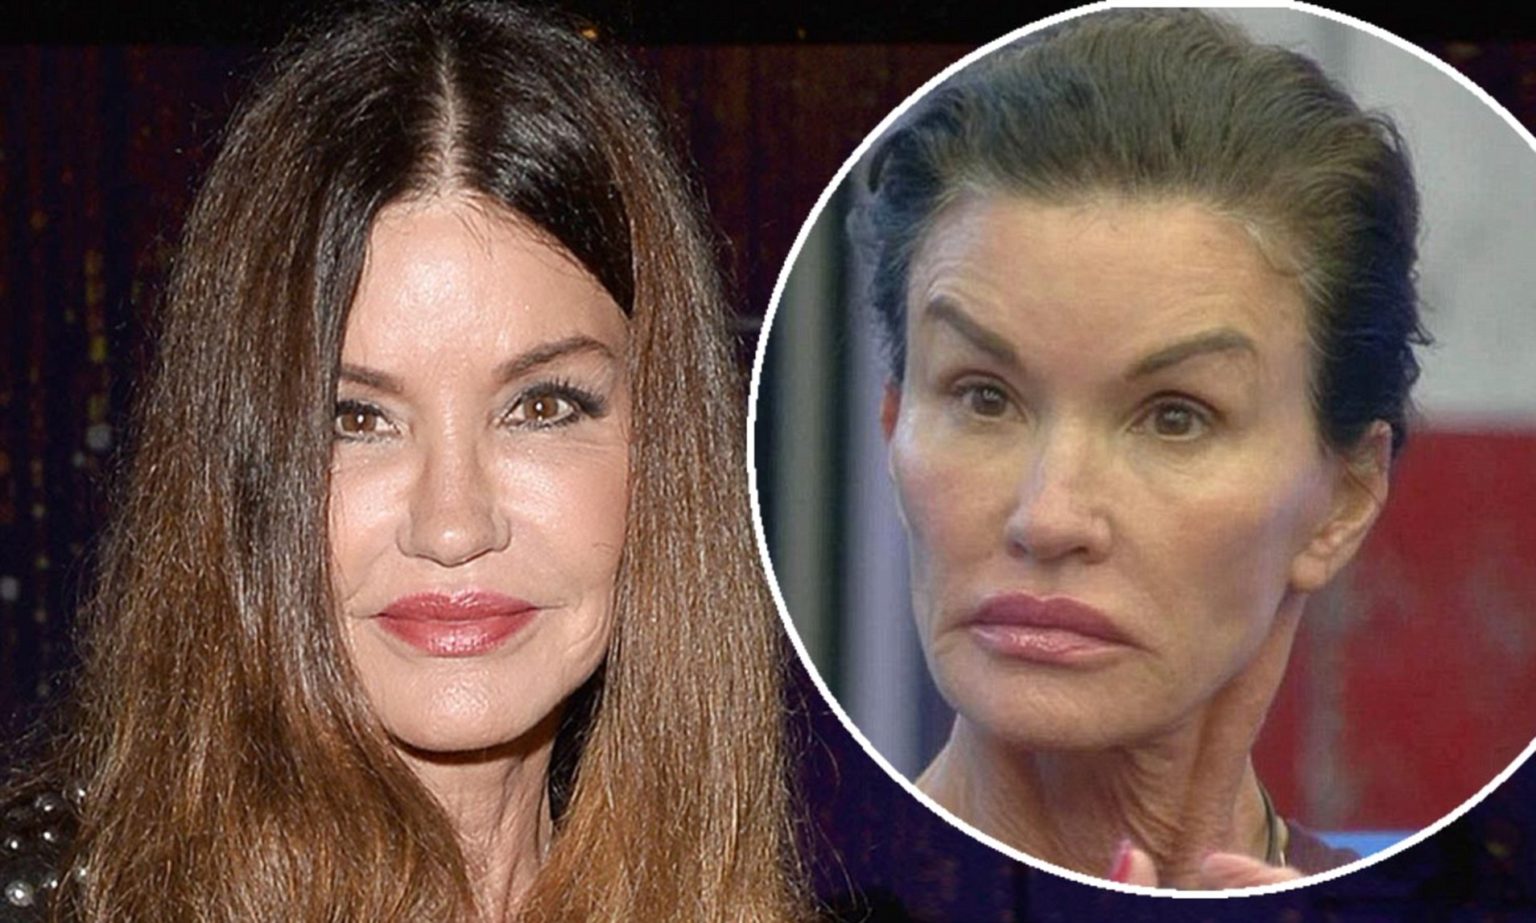 The First Supermodel Janice Dickinson Ruined Her Face With Plastic Surgery.